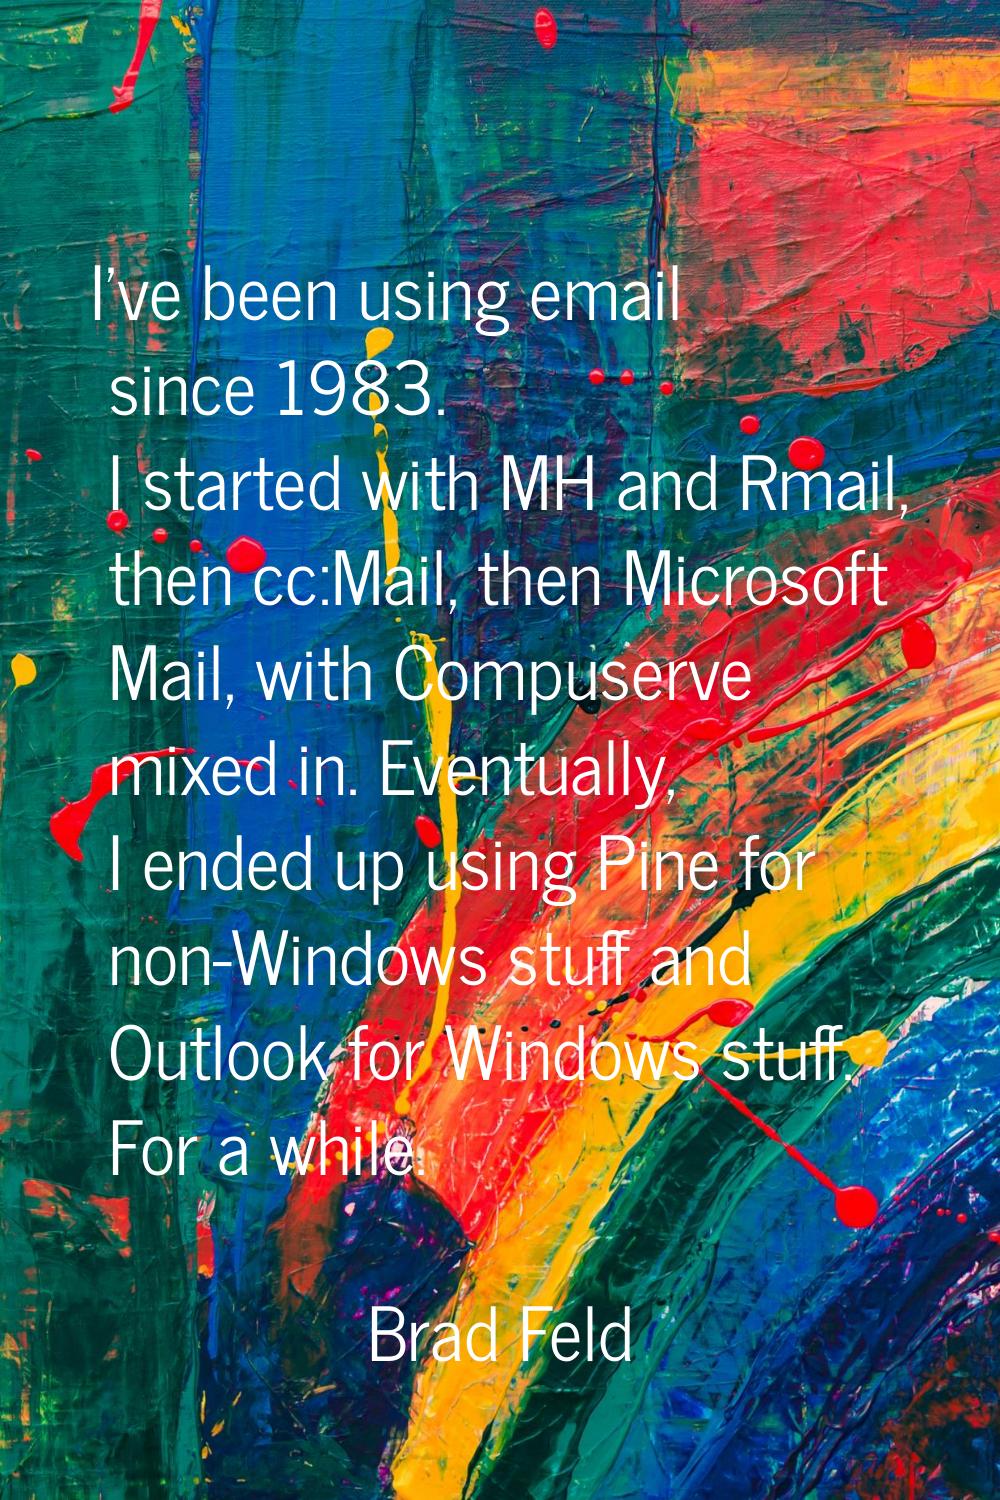 I've been using email since 1983. I started with MH and Rmail, then cc:Mail, then Microsoft Mail, w